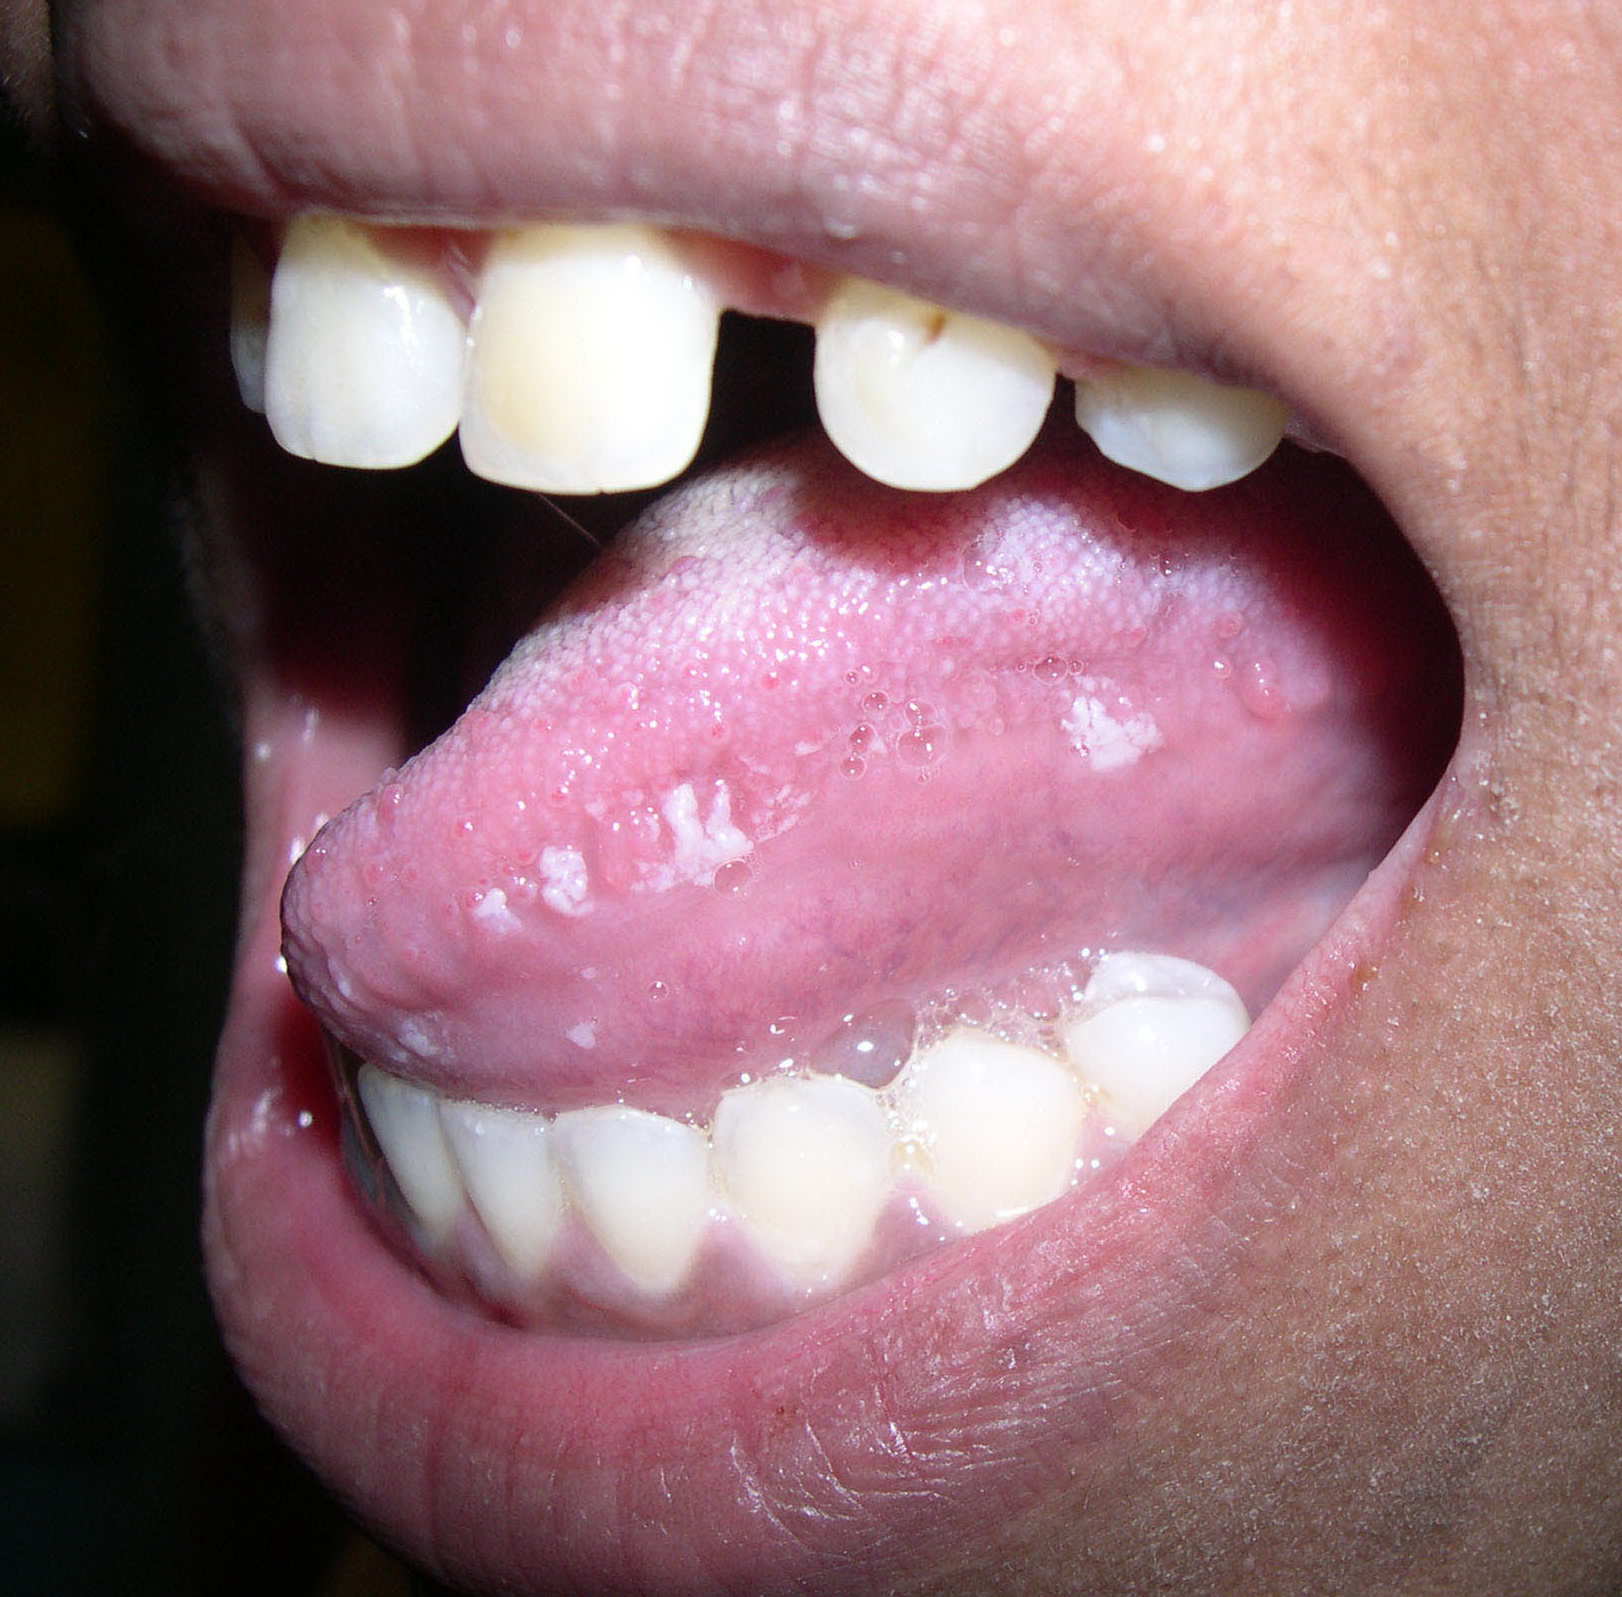 Fungal Infections: Risks of Oral Antifungals-Topic Overview